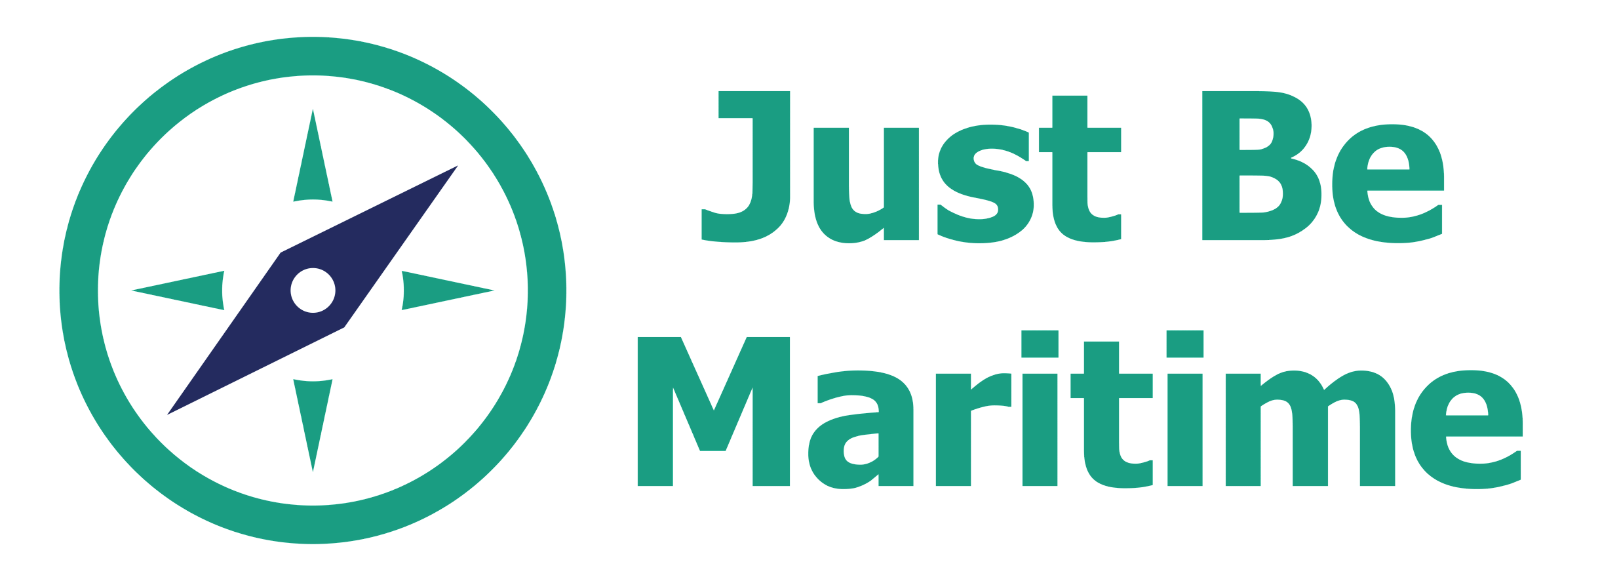 Just Be Maritime's logo.